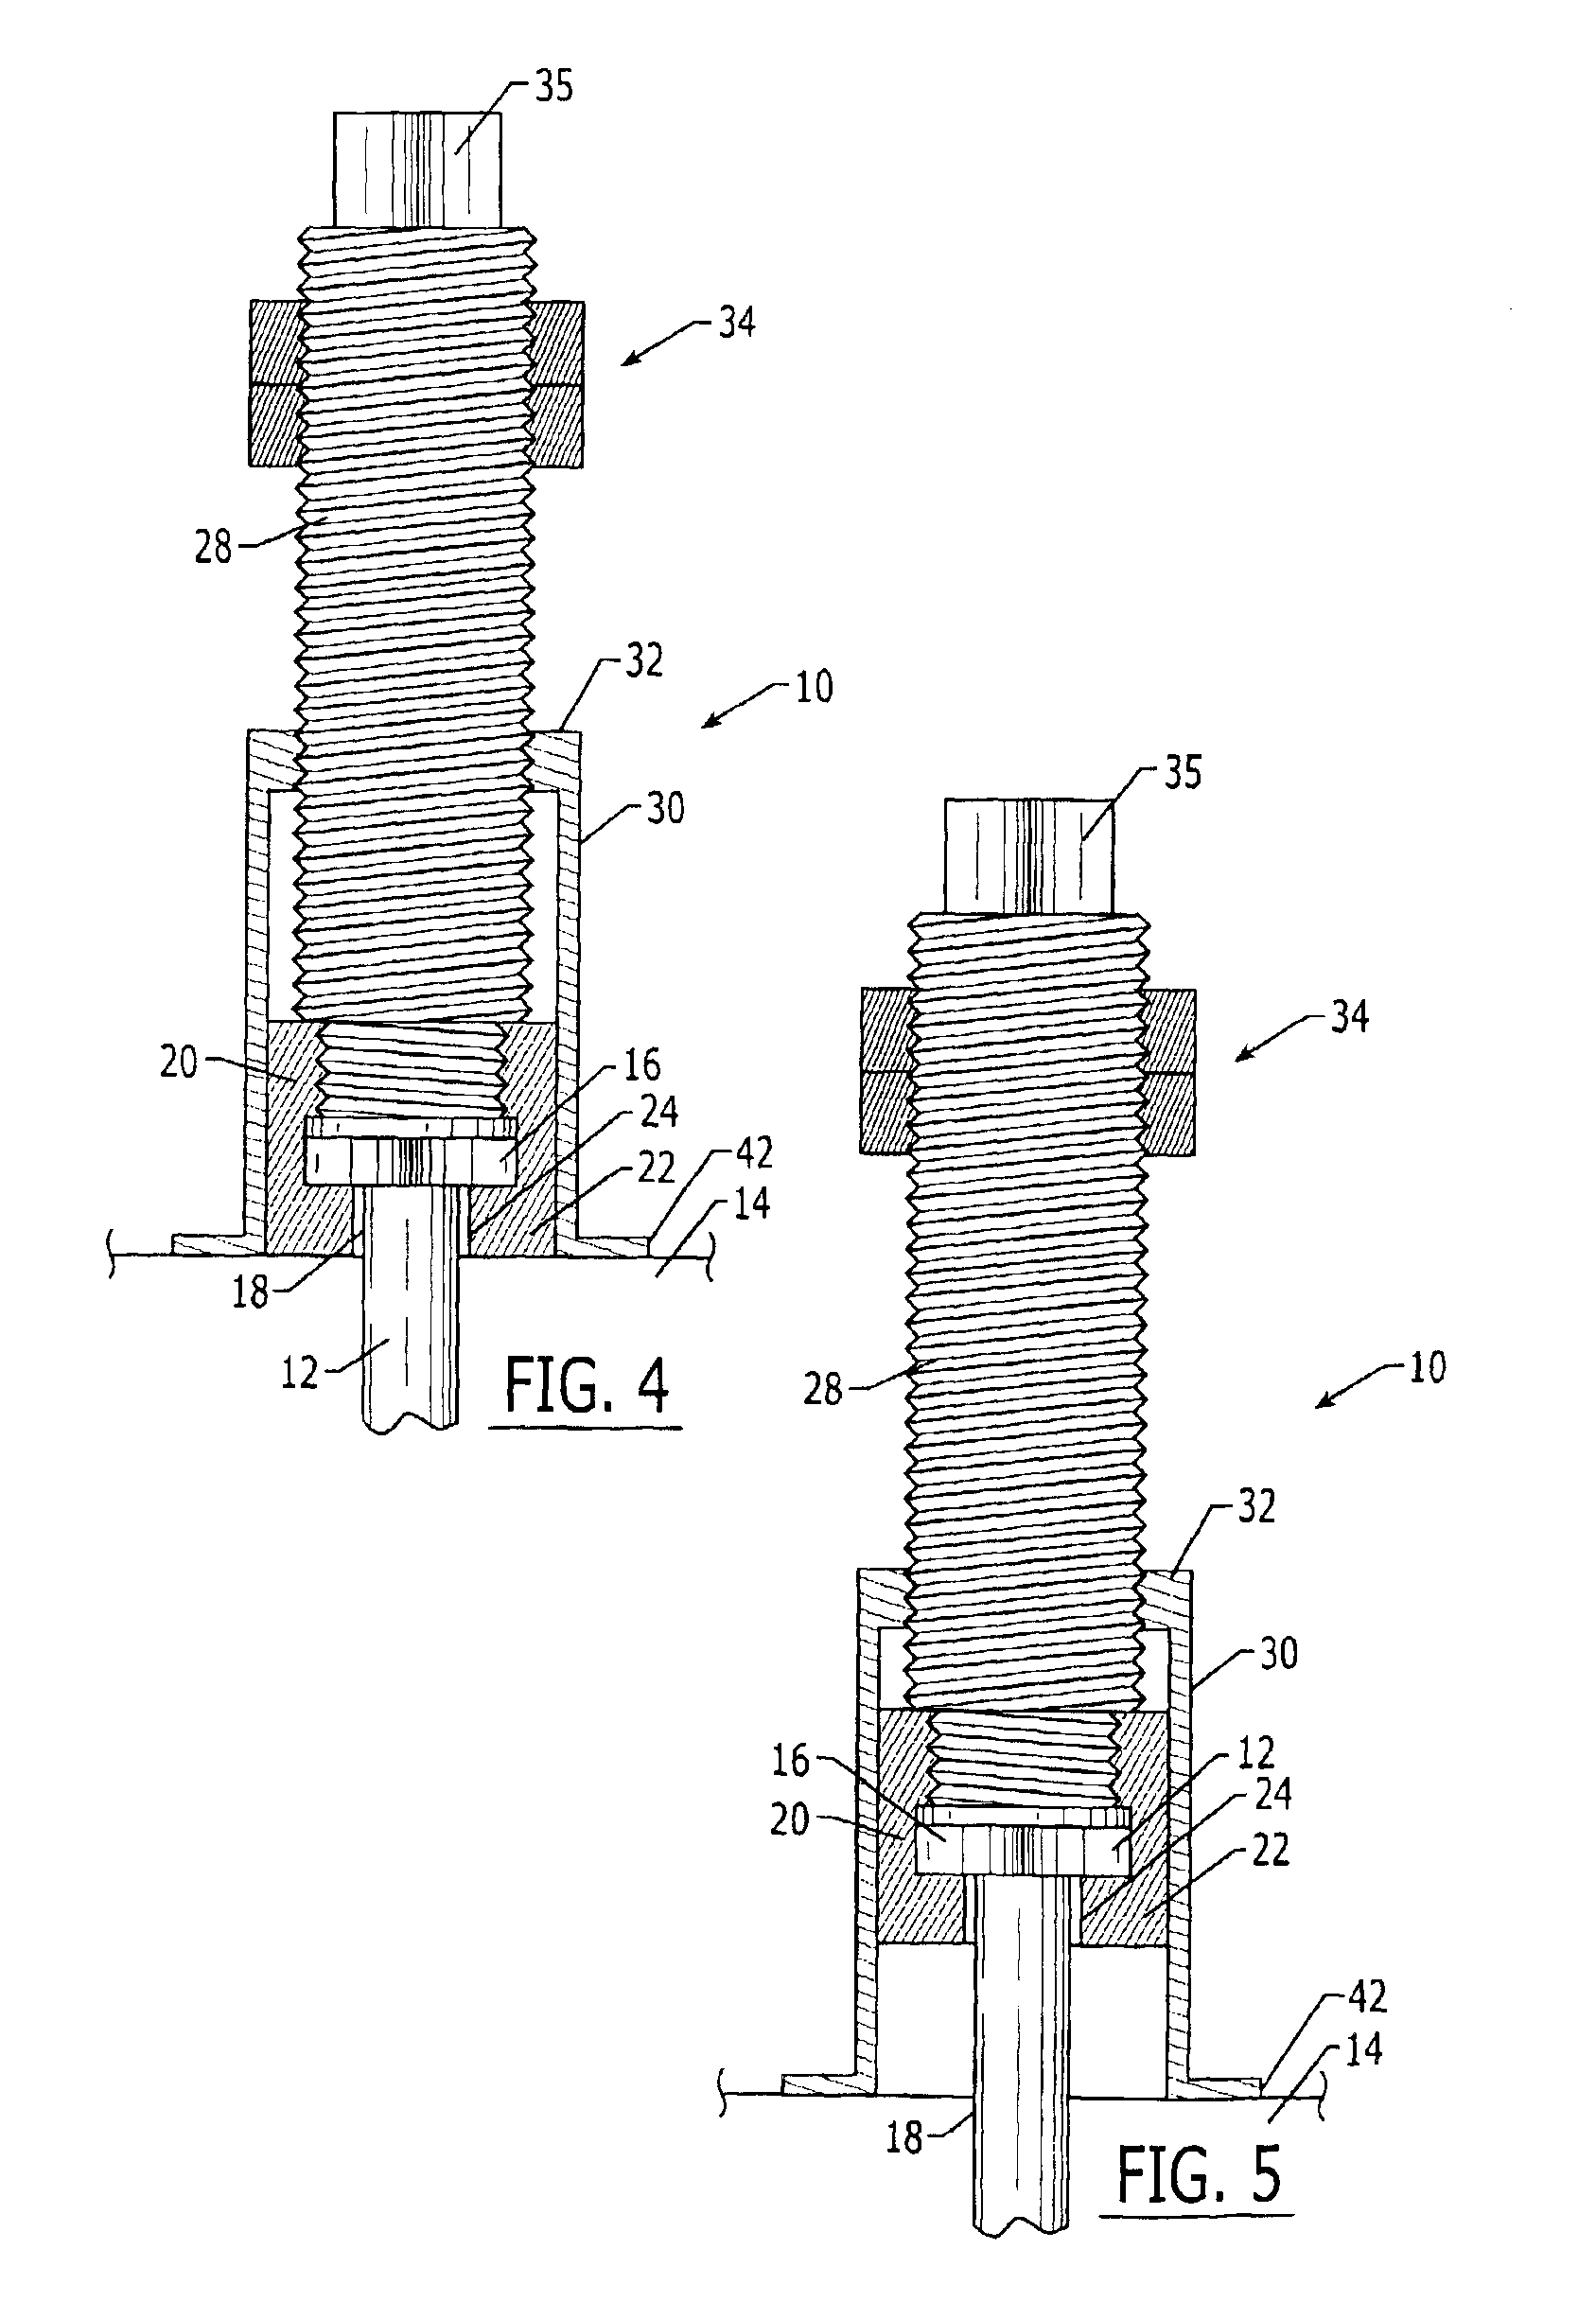 Apparatus for removing a fastener from a workpiece